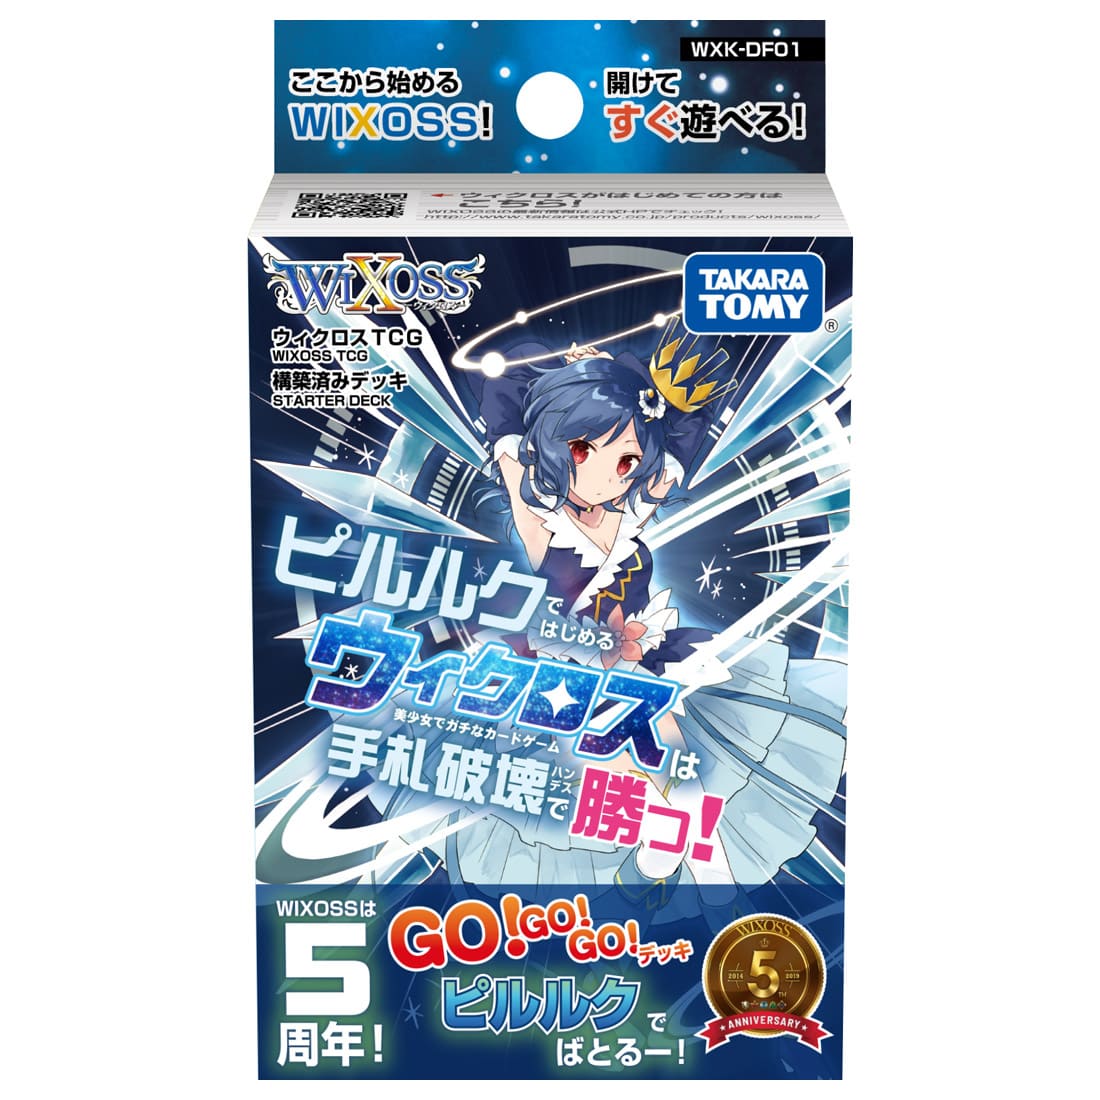 WXK-DF01 Start WIXOSS with Piruluk and Win by Discard! | WIXOSS 